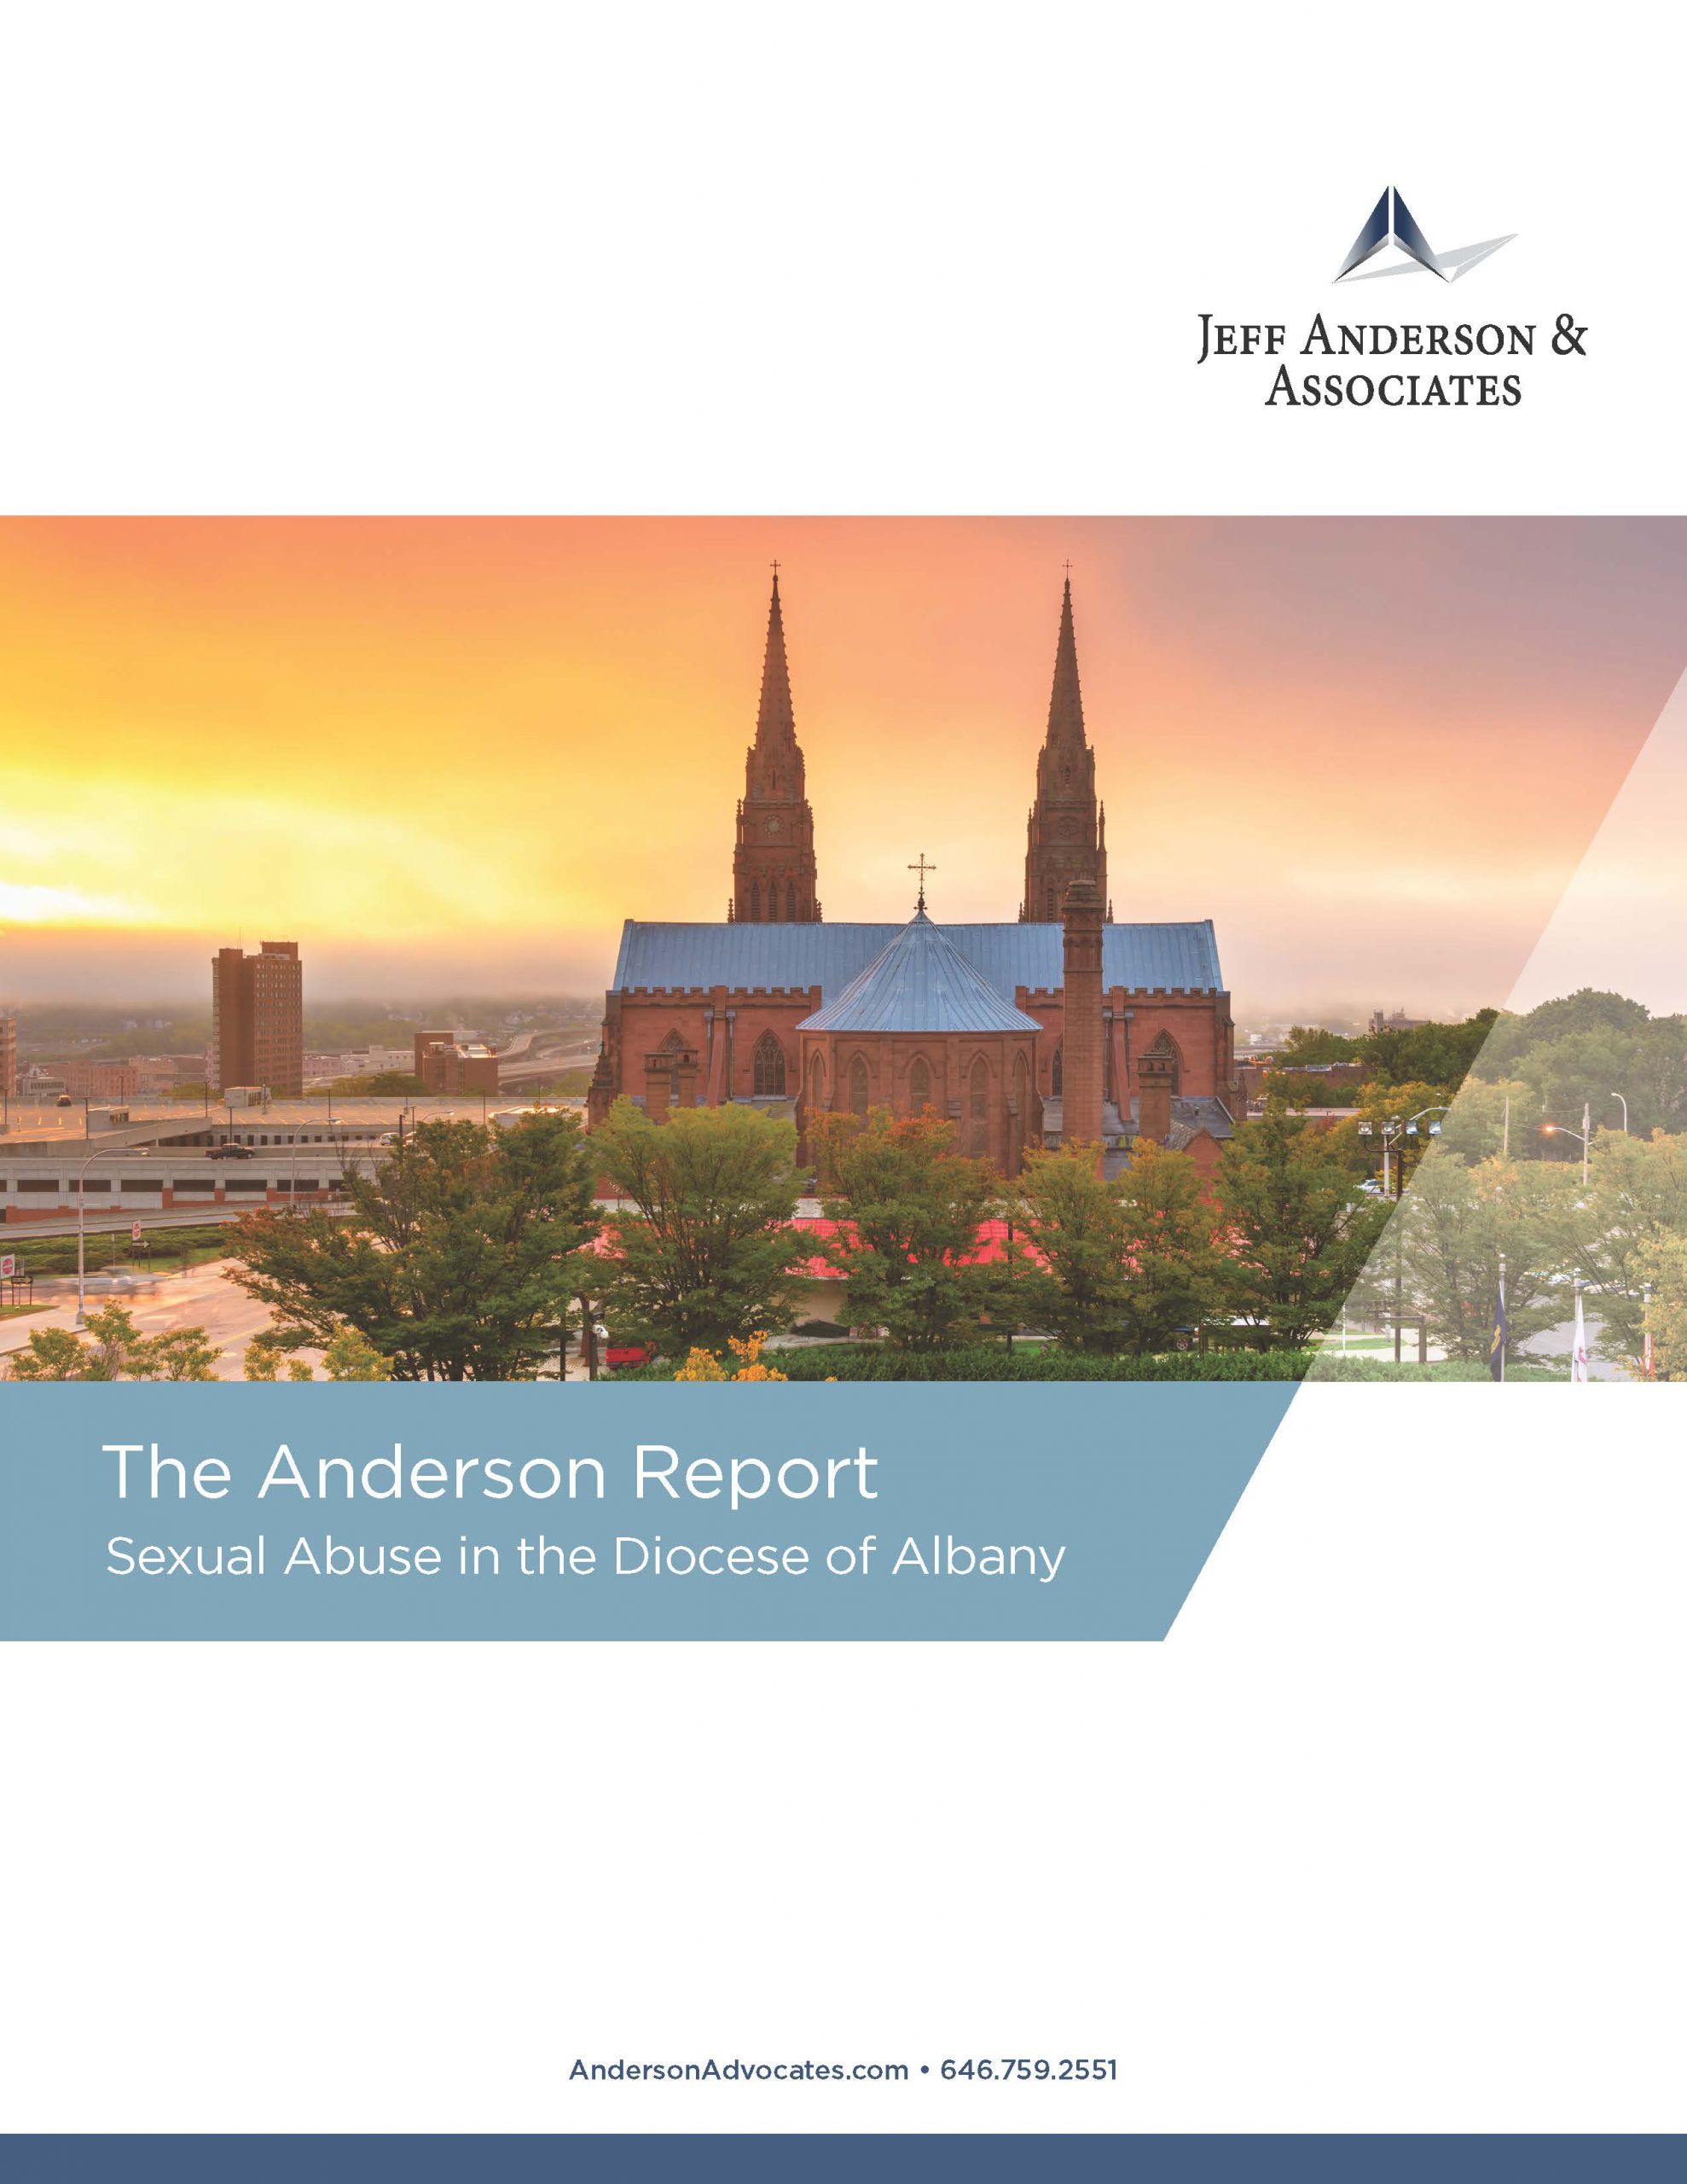 The Anderson Report pic